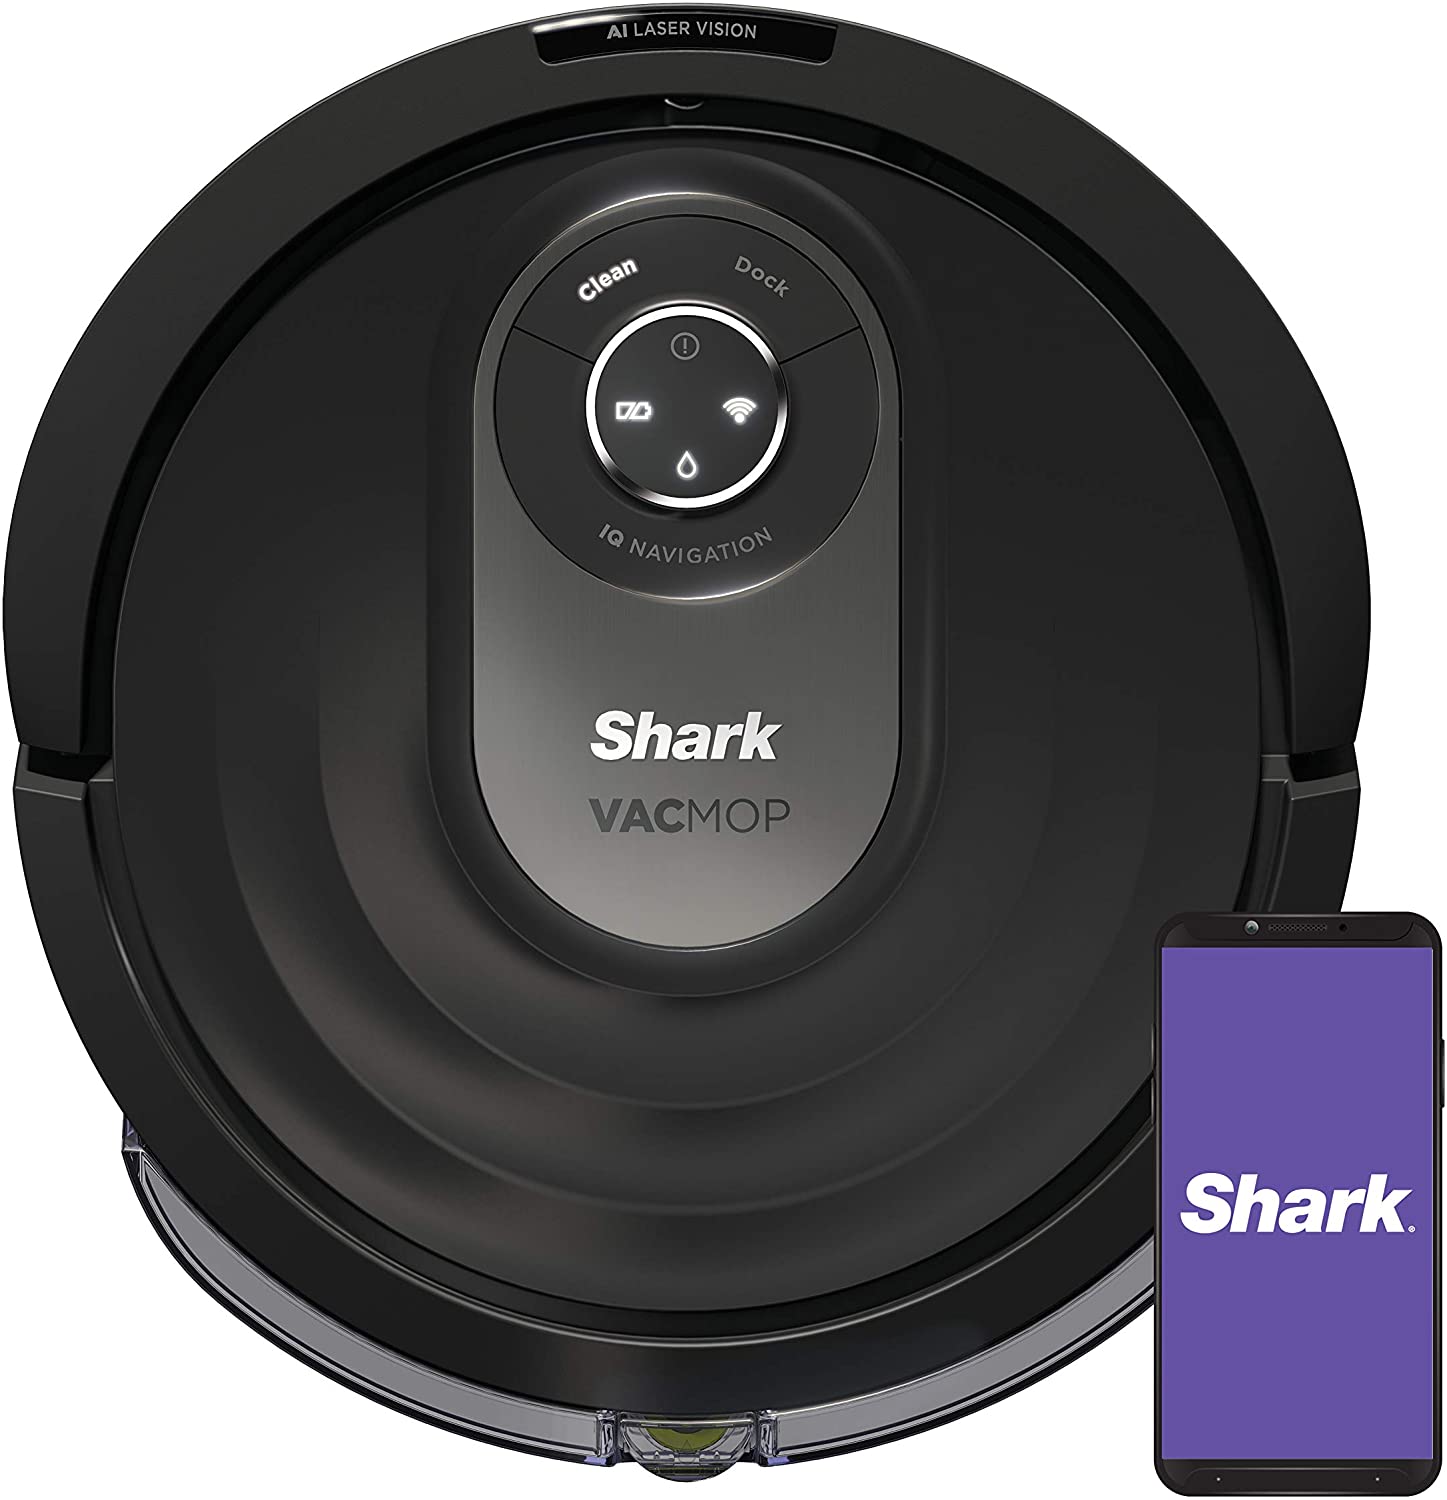 Shark AI Robot VACMOP PRO R201WD with Sonic Mopping, Laser Vision - Black (Pre-Owned)